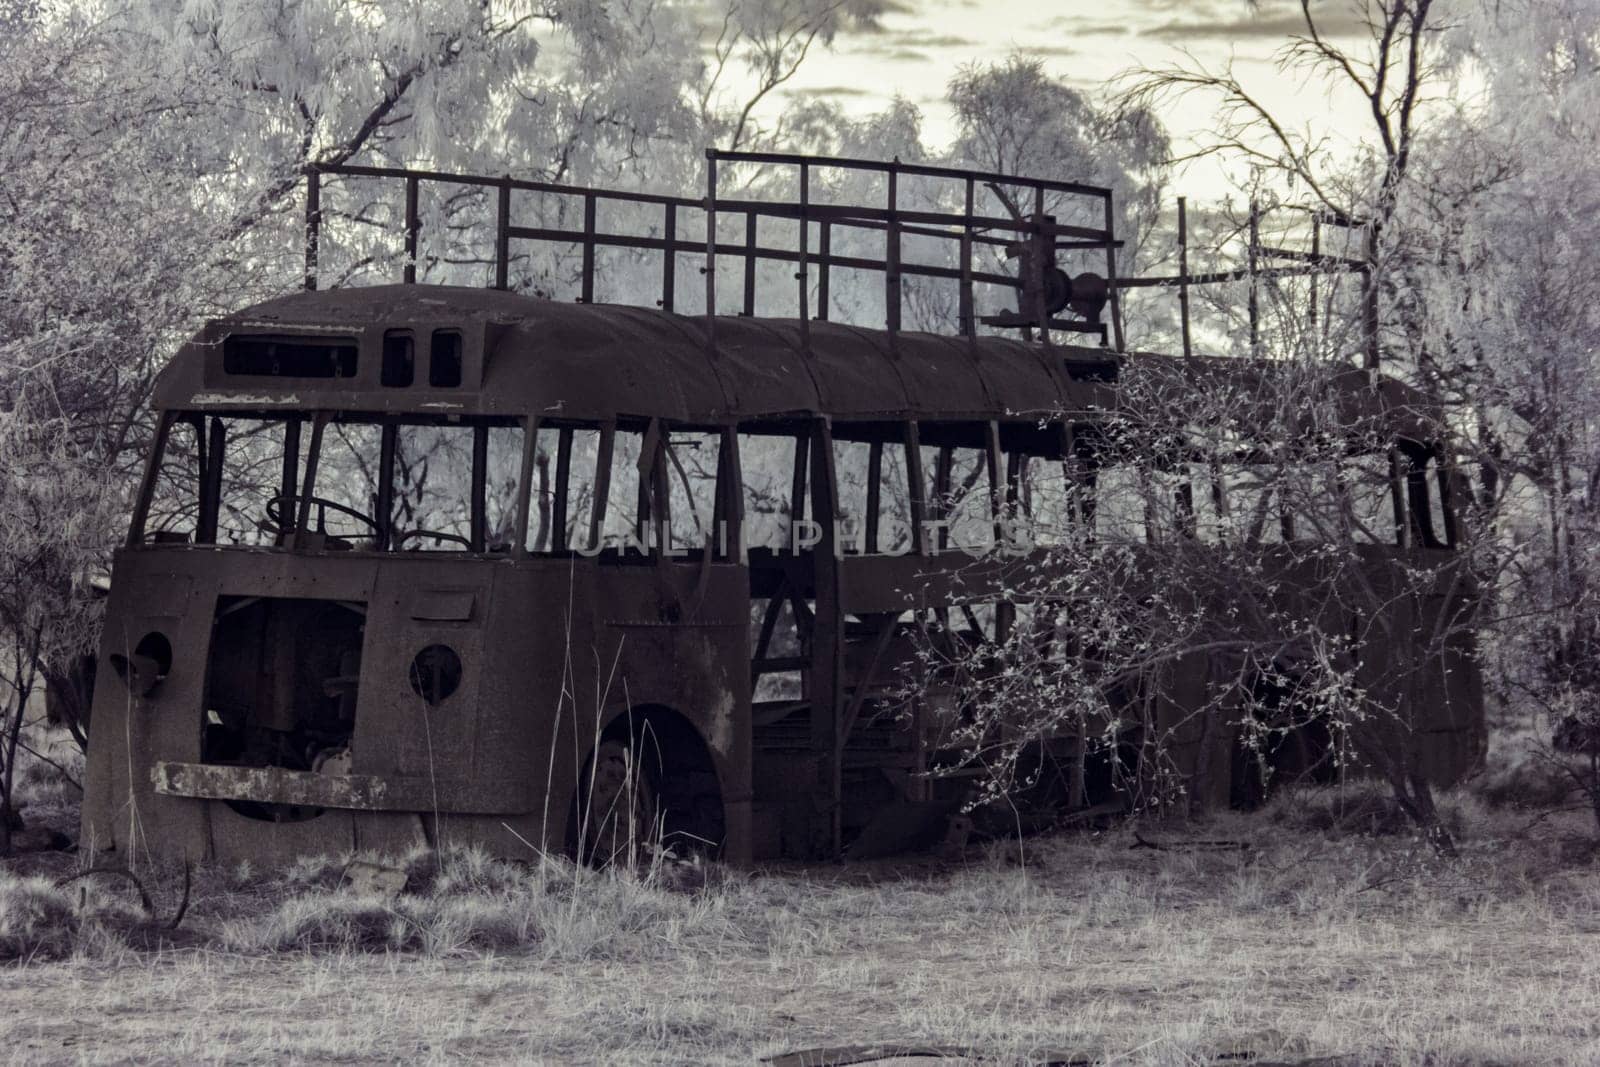 Side view of an abandoned, rusted tour bus in a forest, capture in infrared by StefanMal